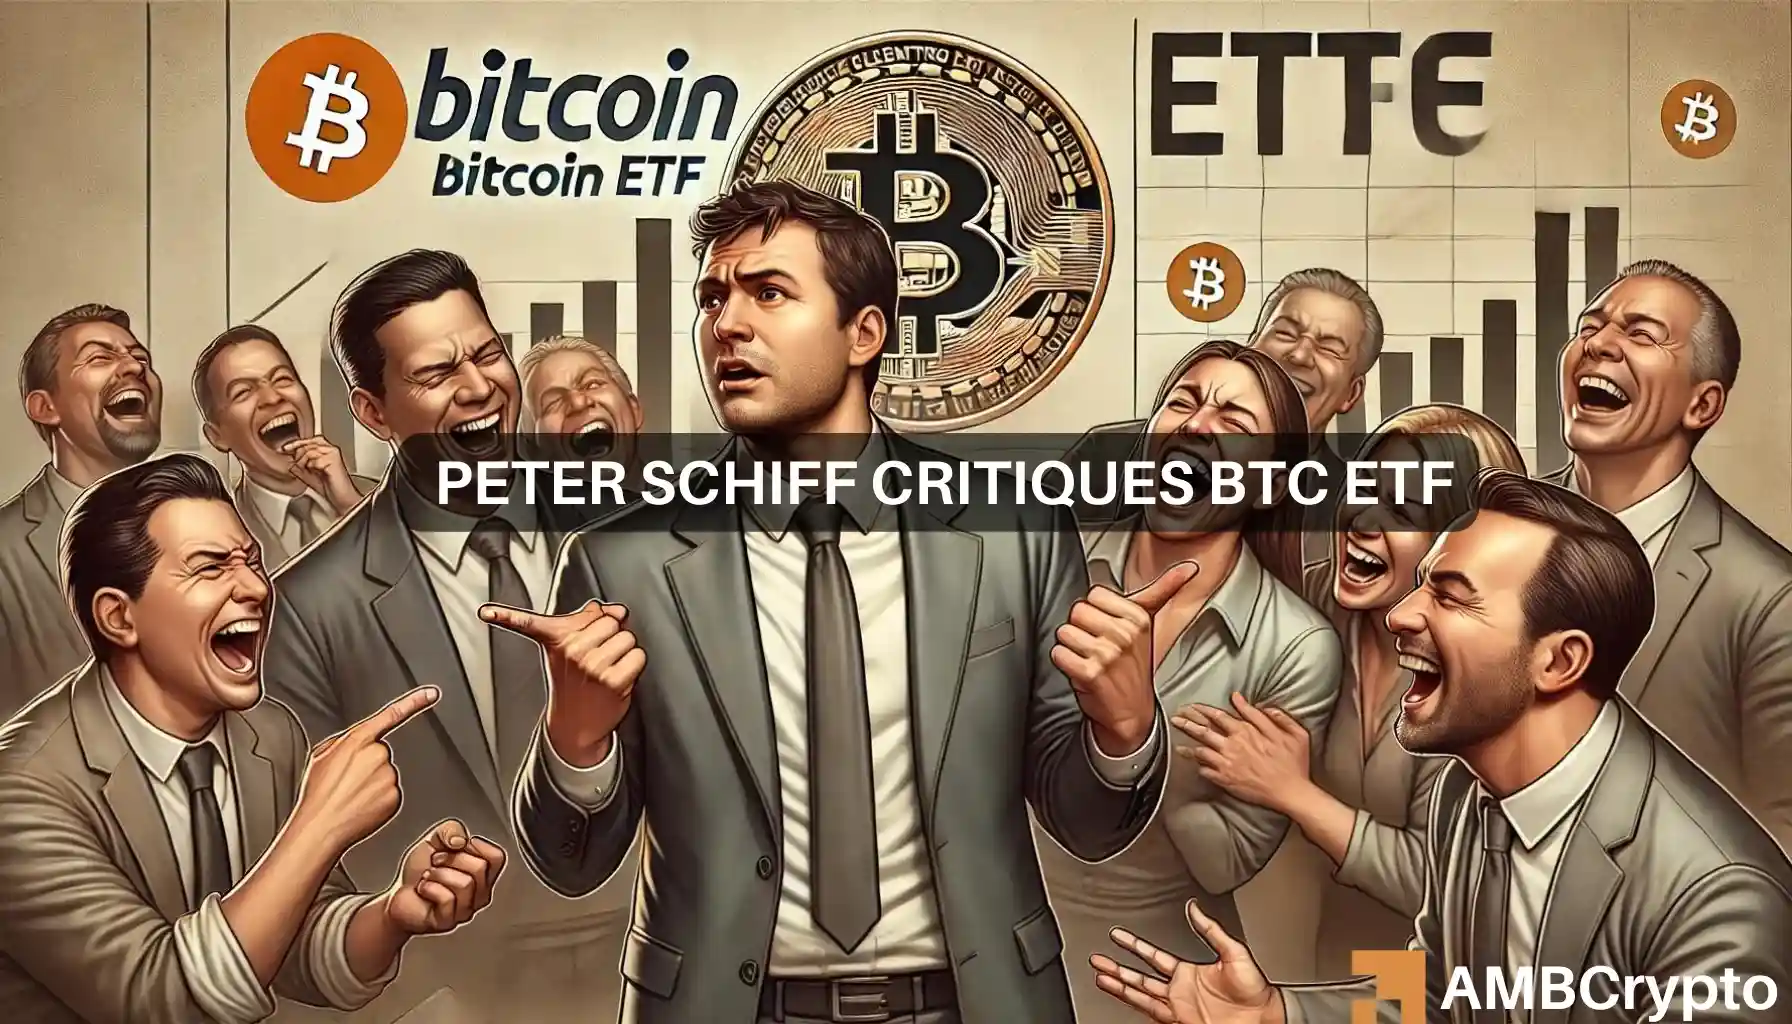 Bitcoin ETF investors are ‘20% worse off’: Peter Schiff – Is this true?